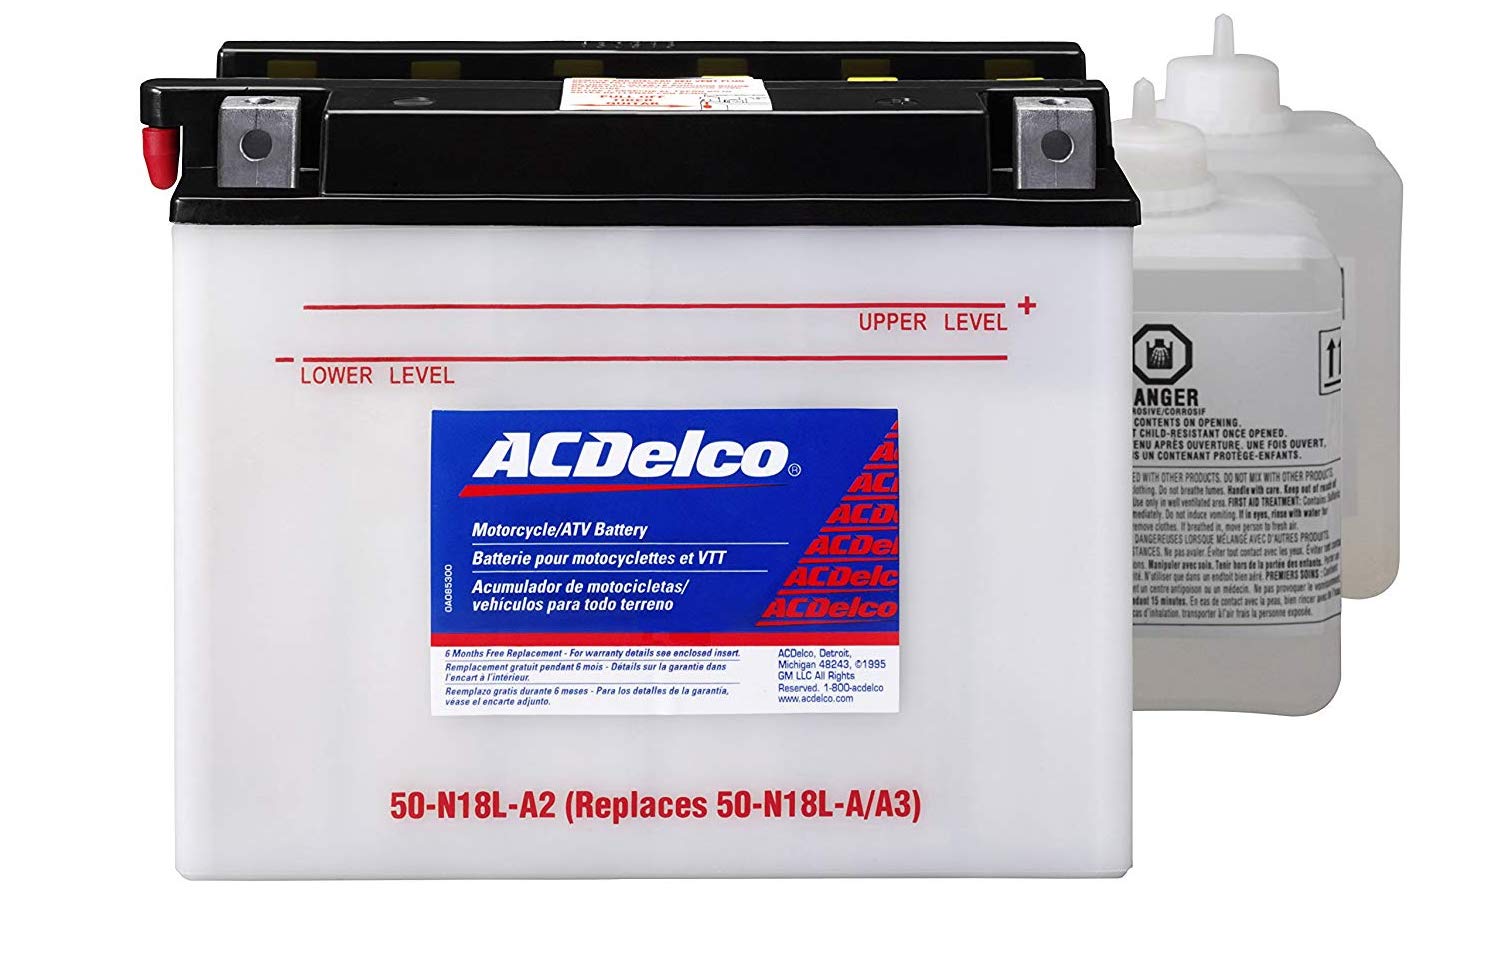 ACDelco conventional lead acid battery